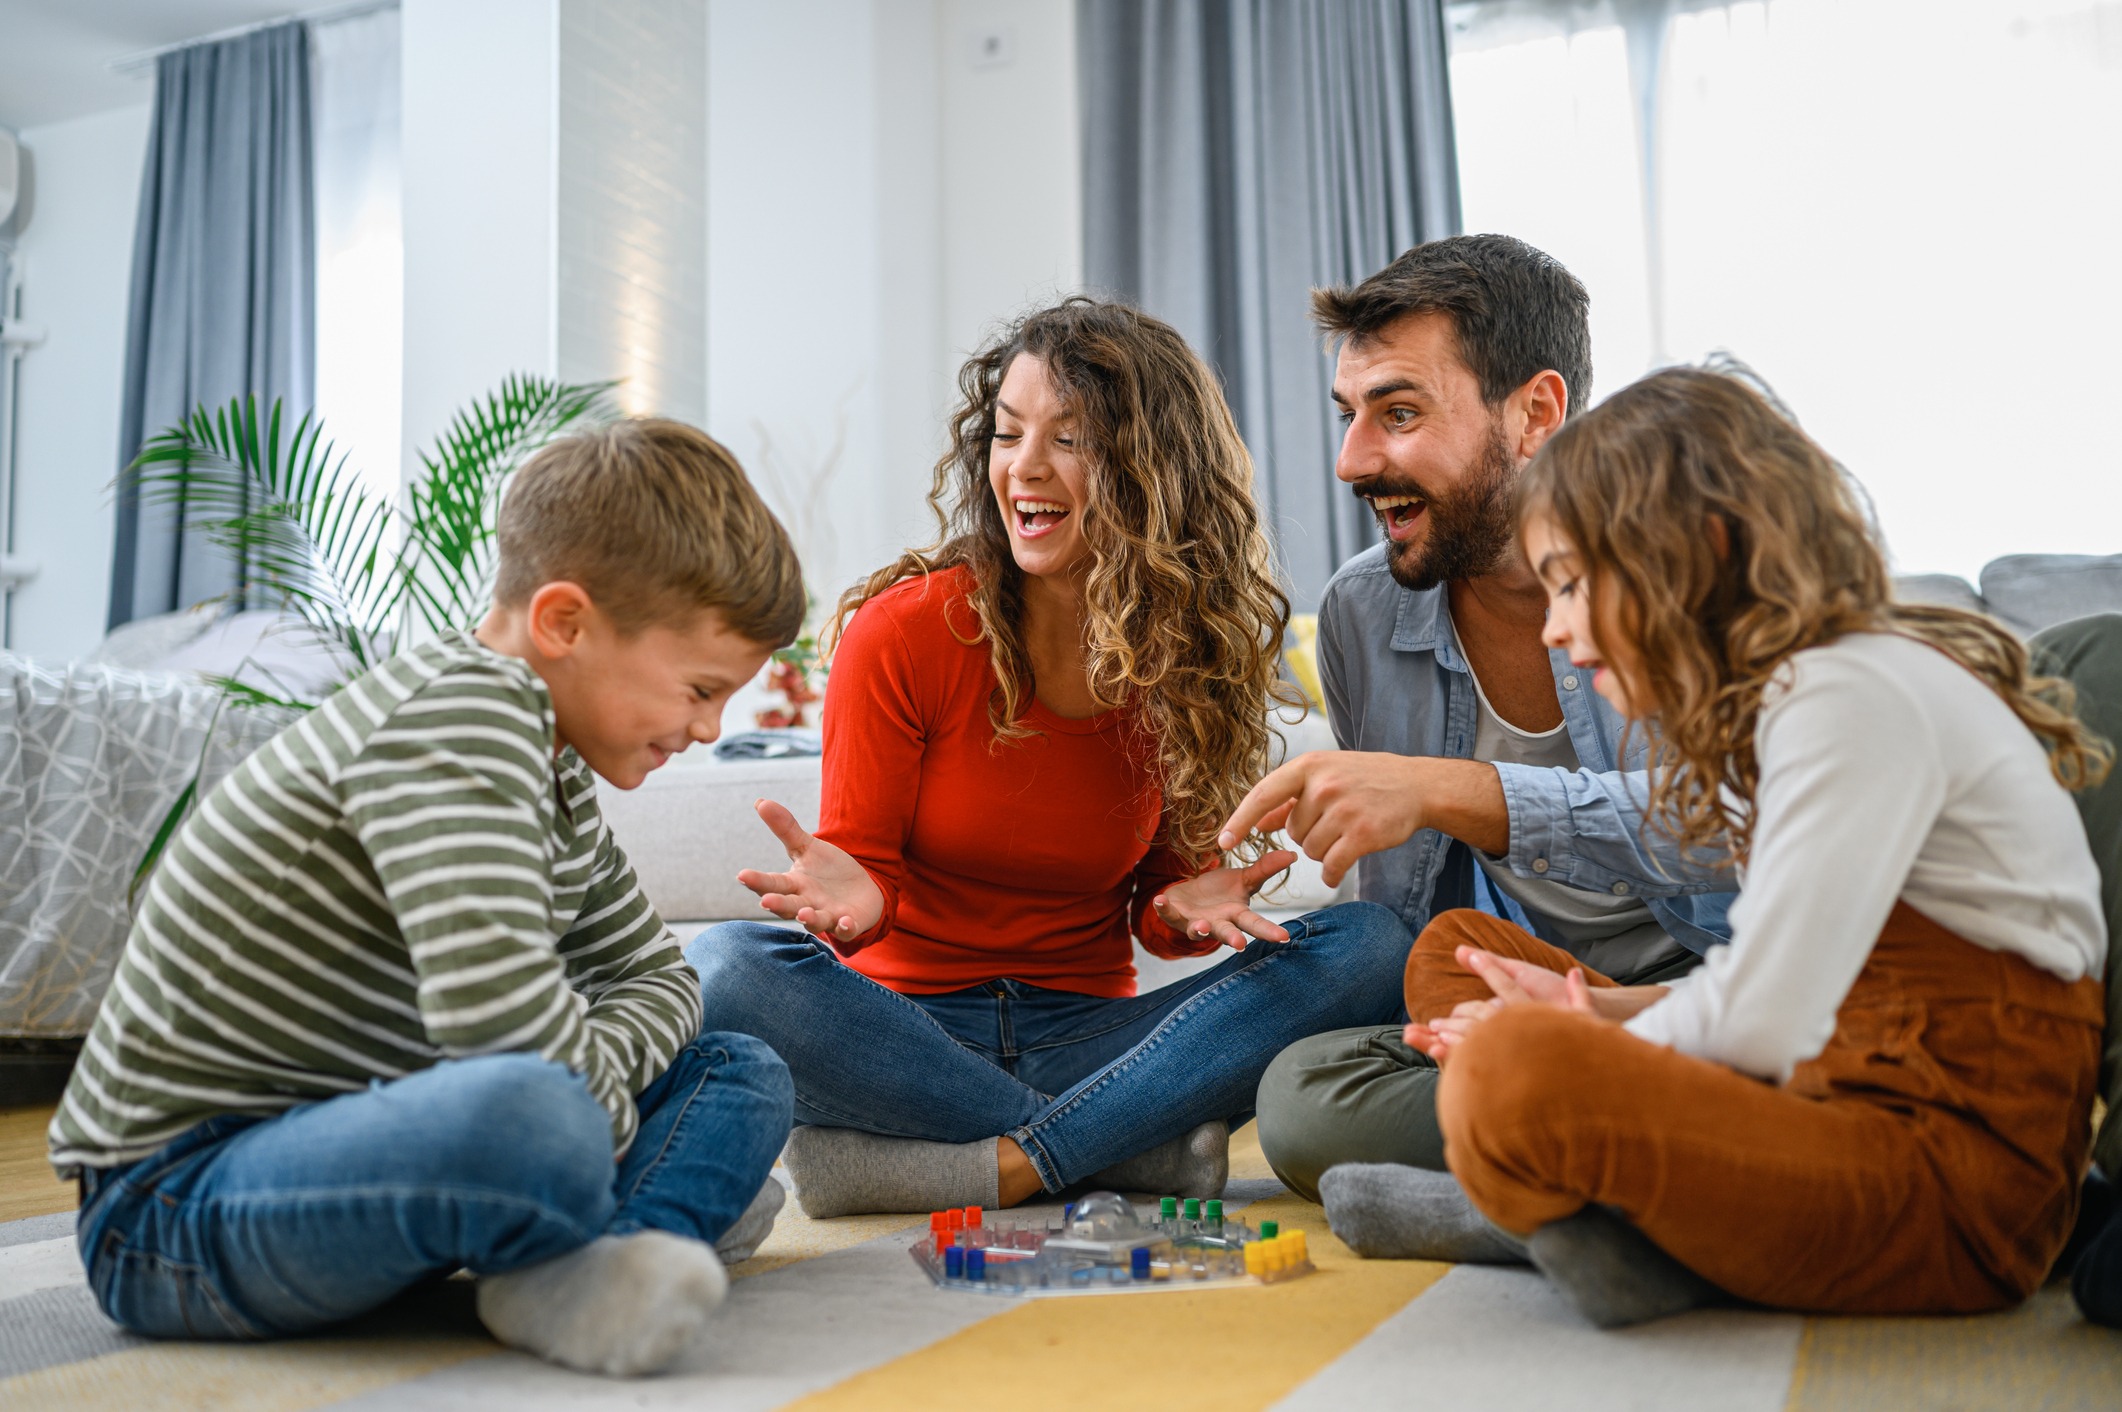 A family is laughing and playing a board game together on the floor in a bright, cozy living room setting.